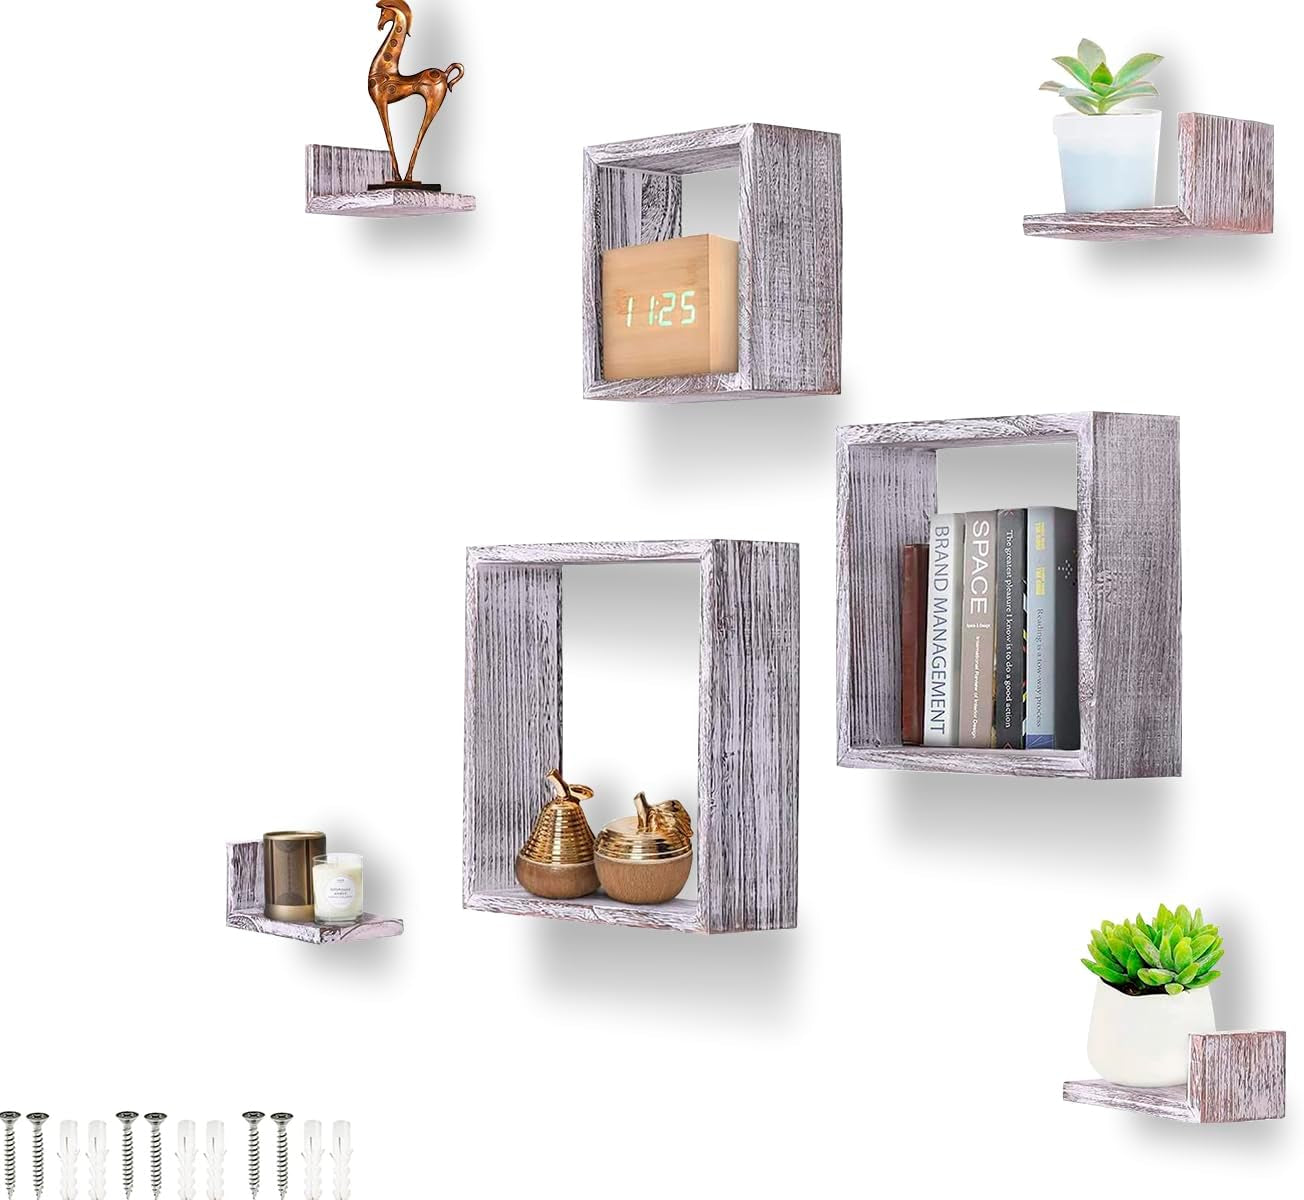 Comfify Rustic Wall Mounted Square Shaped Floating Shelves – Set of 7 – 3 Square Shelves and 4 L-Shaped Rustic Shelves – Screws and Anchors Included – Rustic Wall Décor - Rustic White